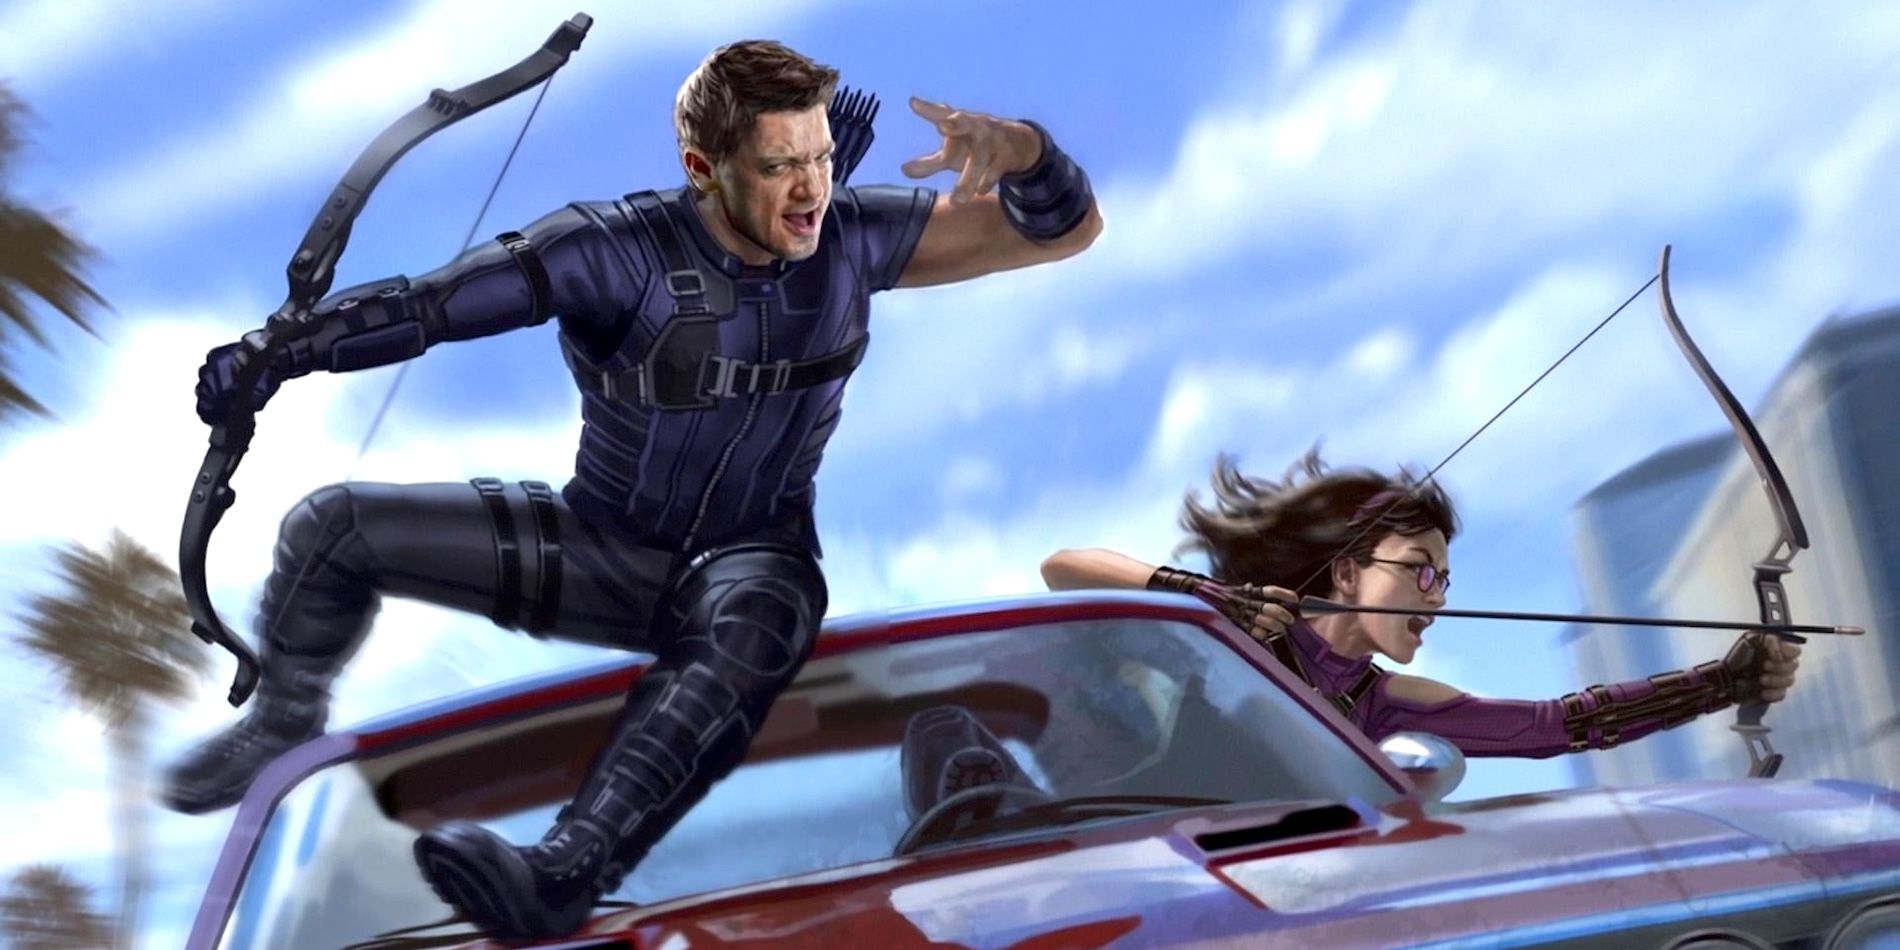 Jeremy Renner as Clint Barton with Kate Bishop in Hawkeye Show Concept Art